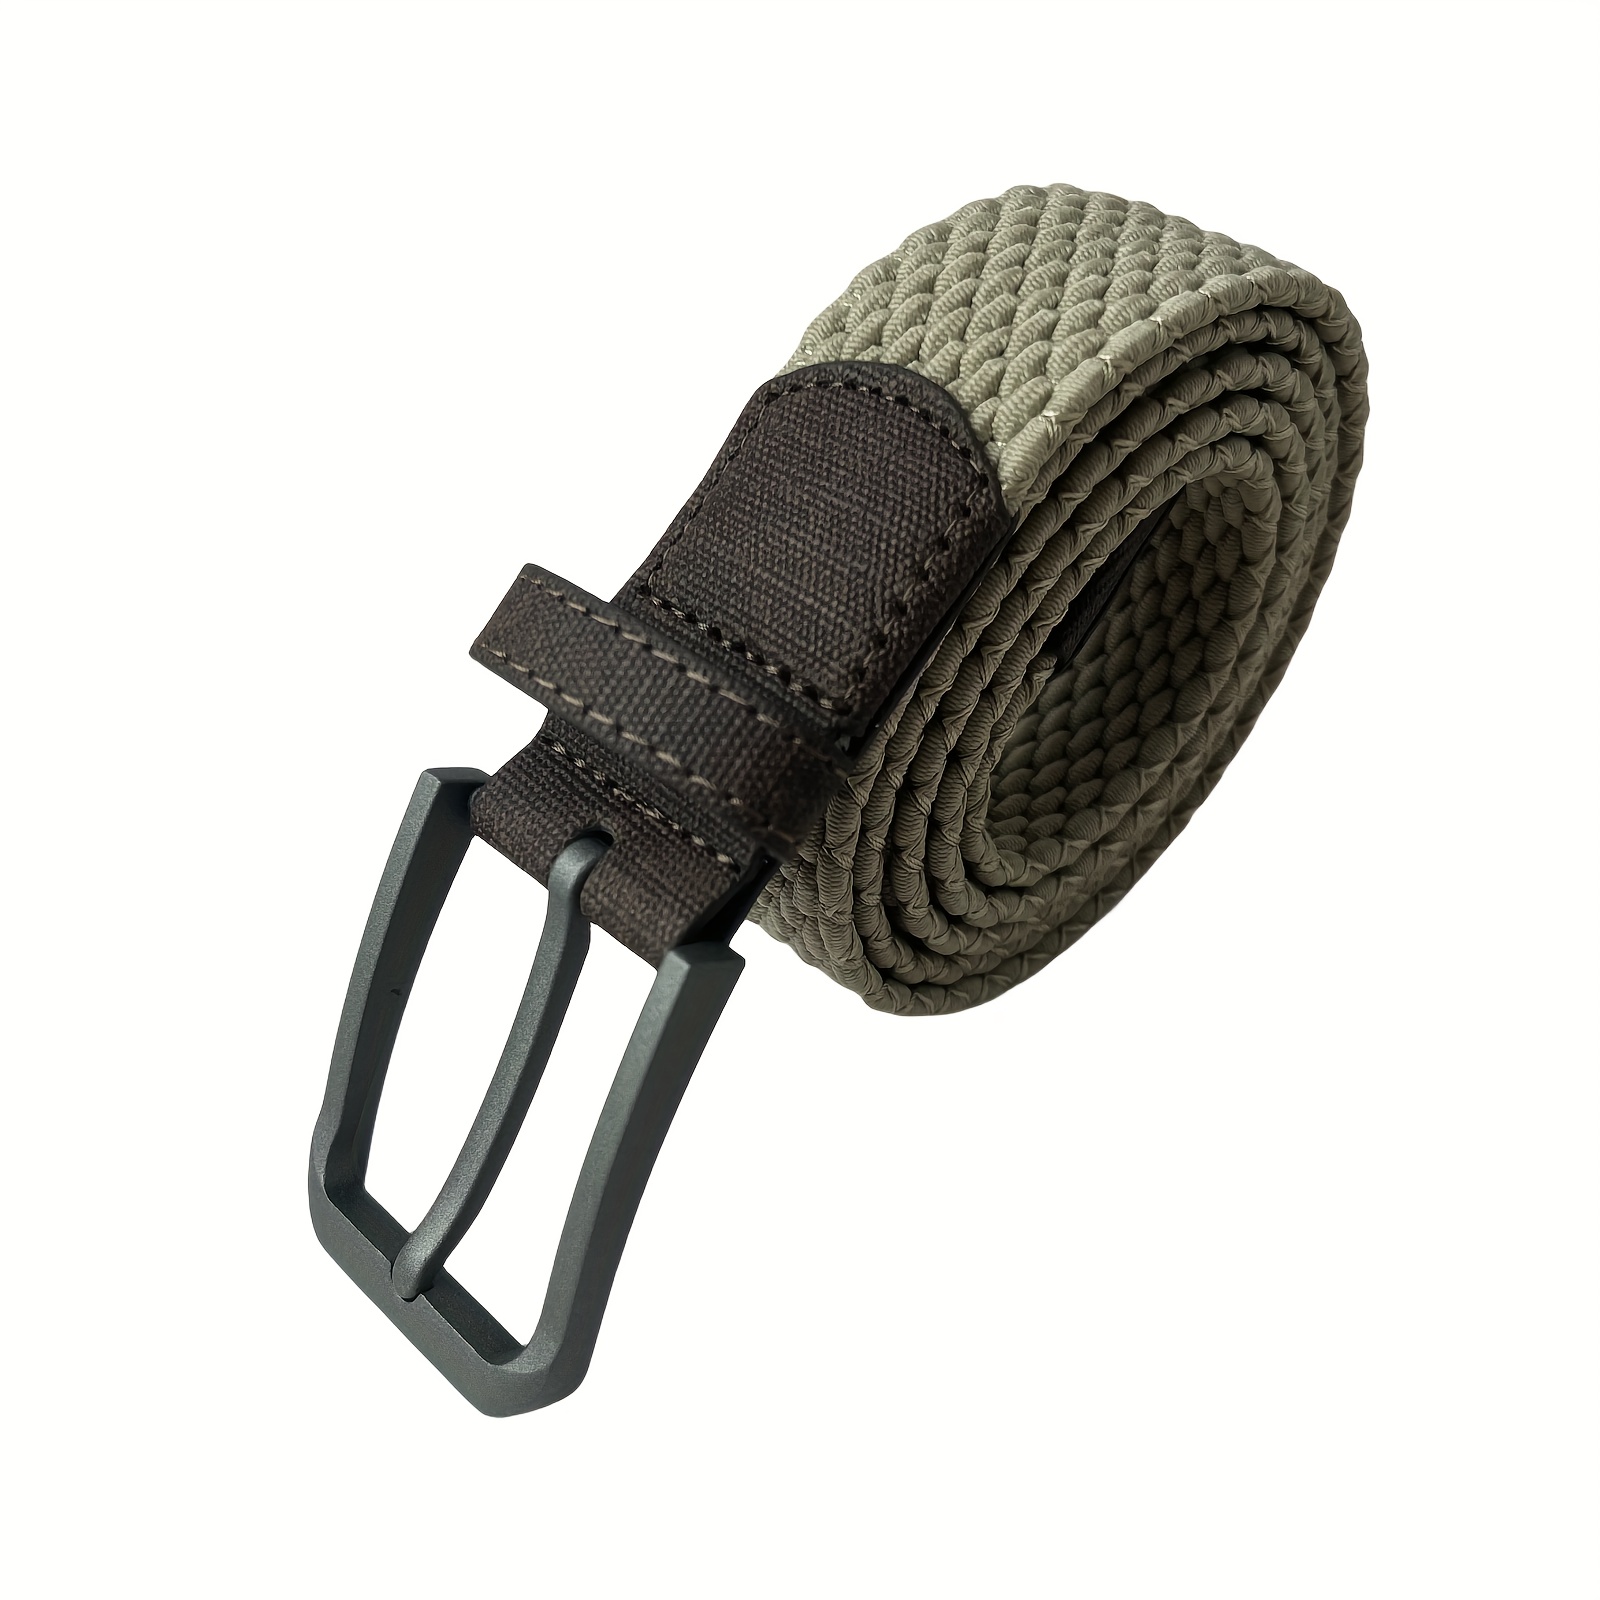 1 Pc Golf Braid Elastic Belt Mens Casual Canvas Belt For Jeans Pants, Check Out Today's Deals Now